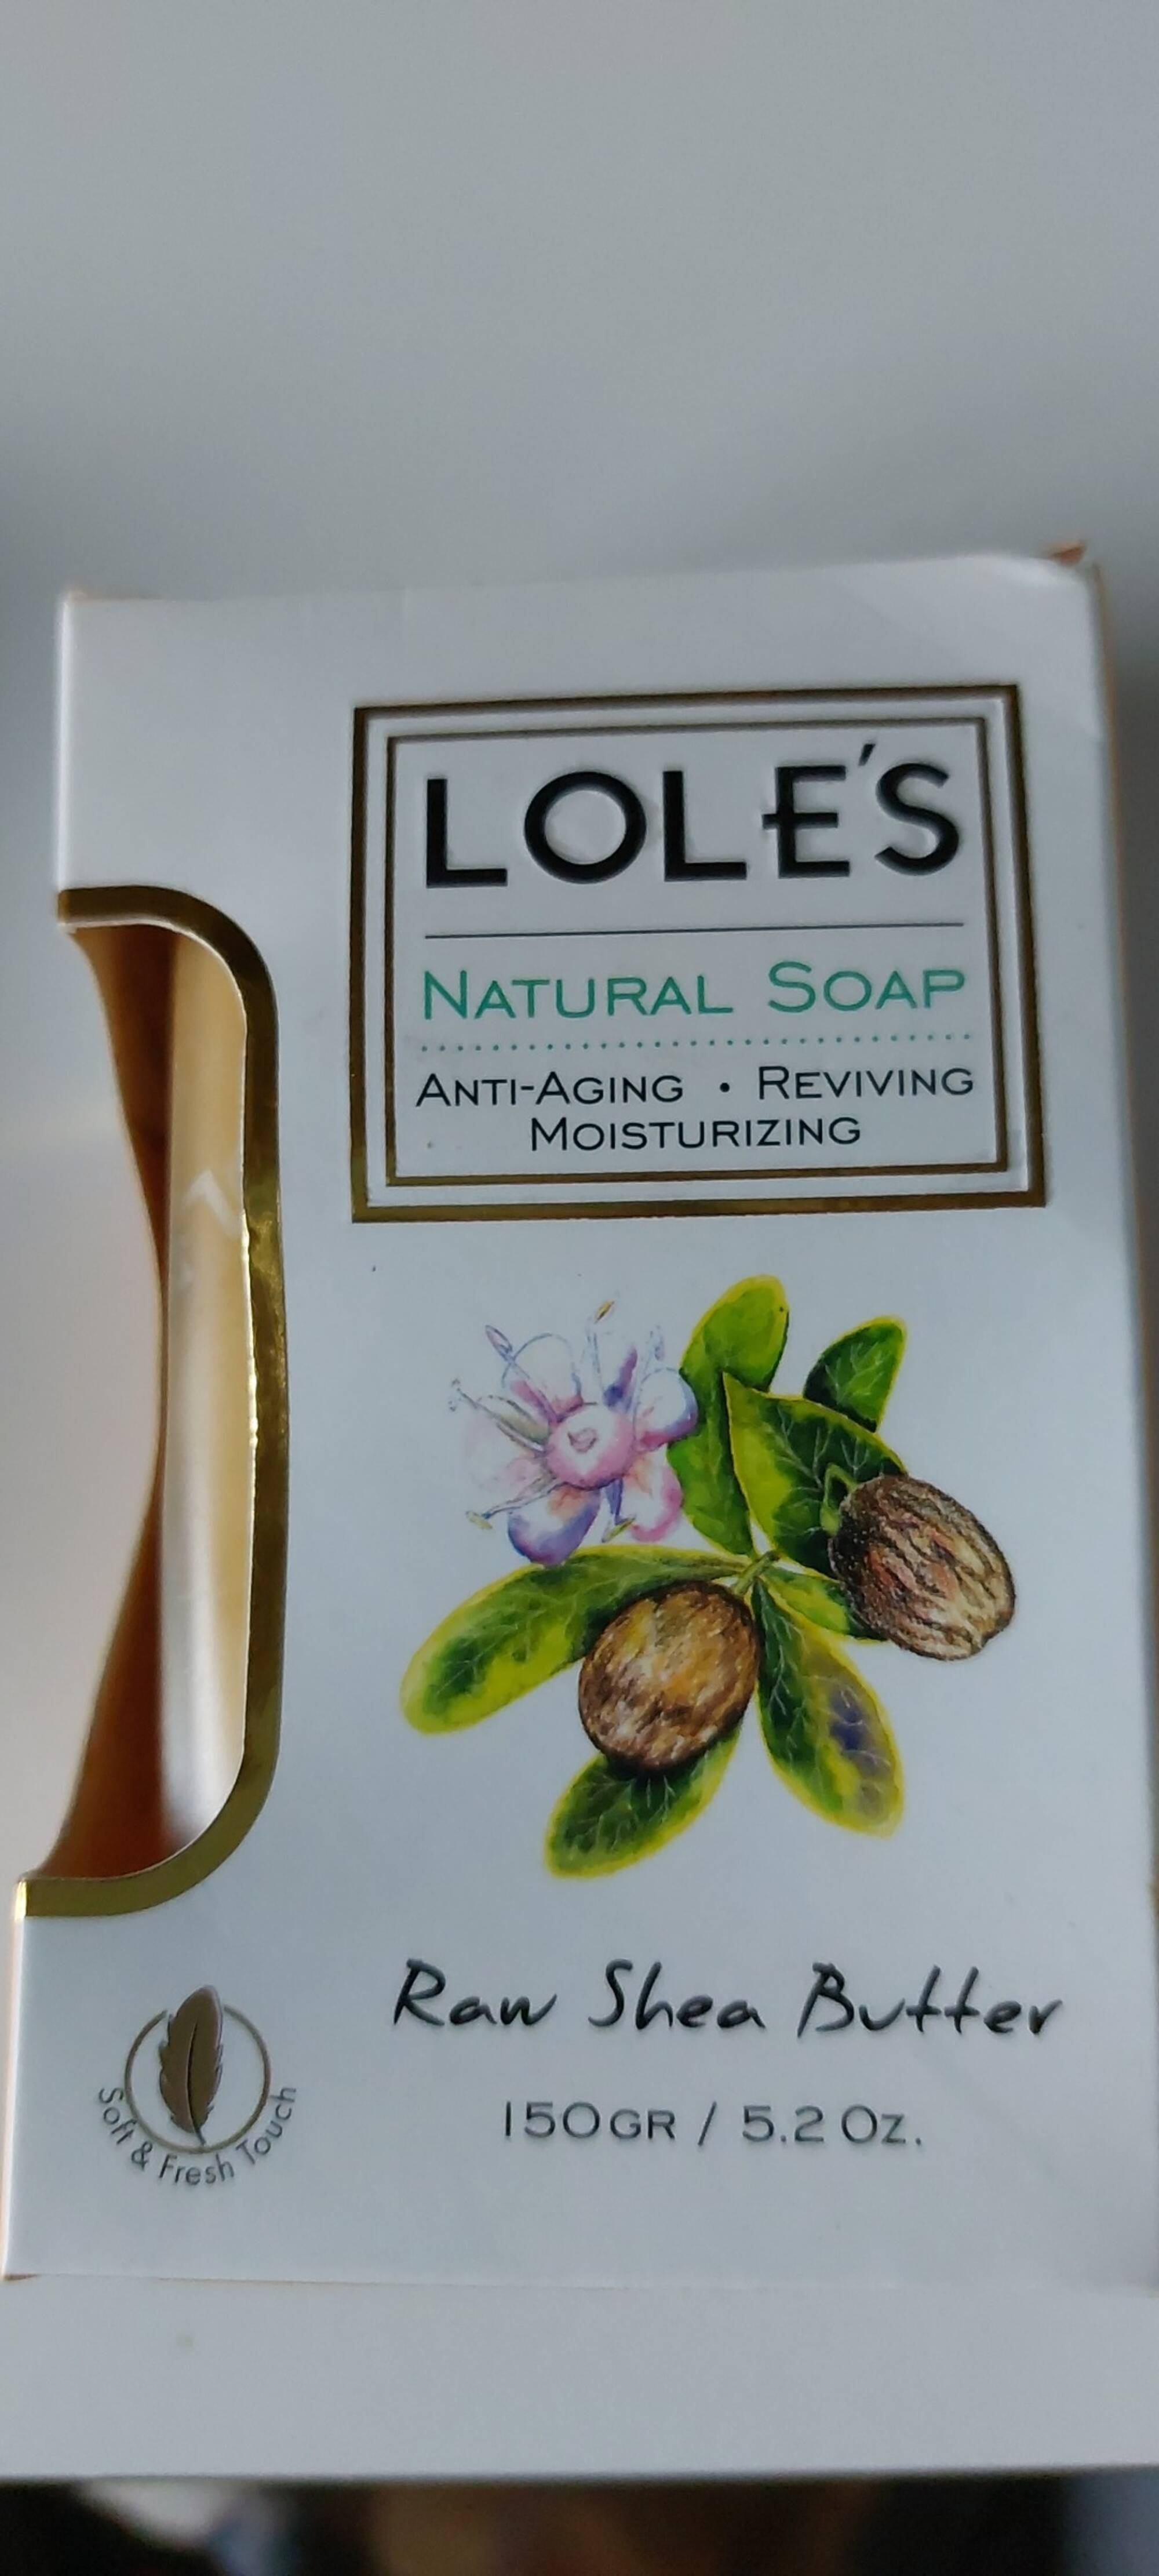 LOLE'S - Natural soap raw shea butter